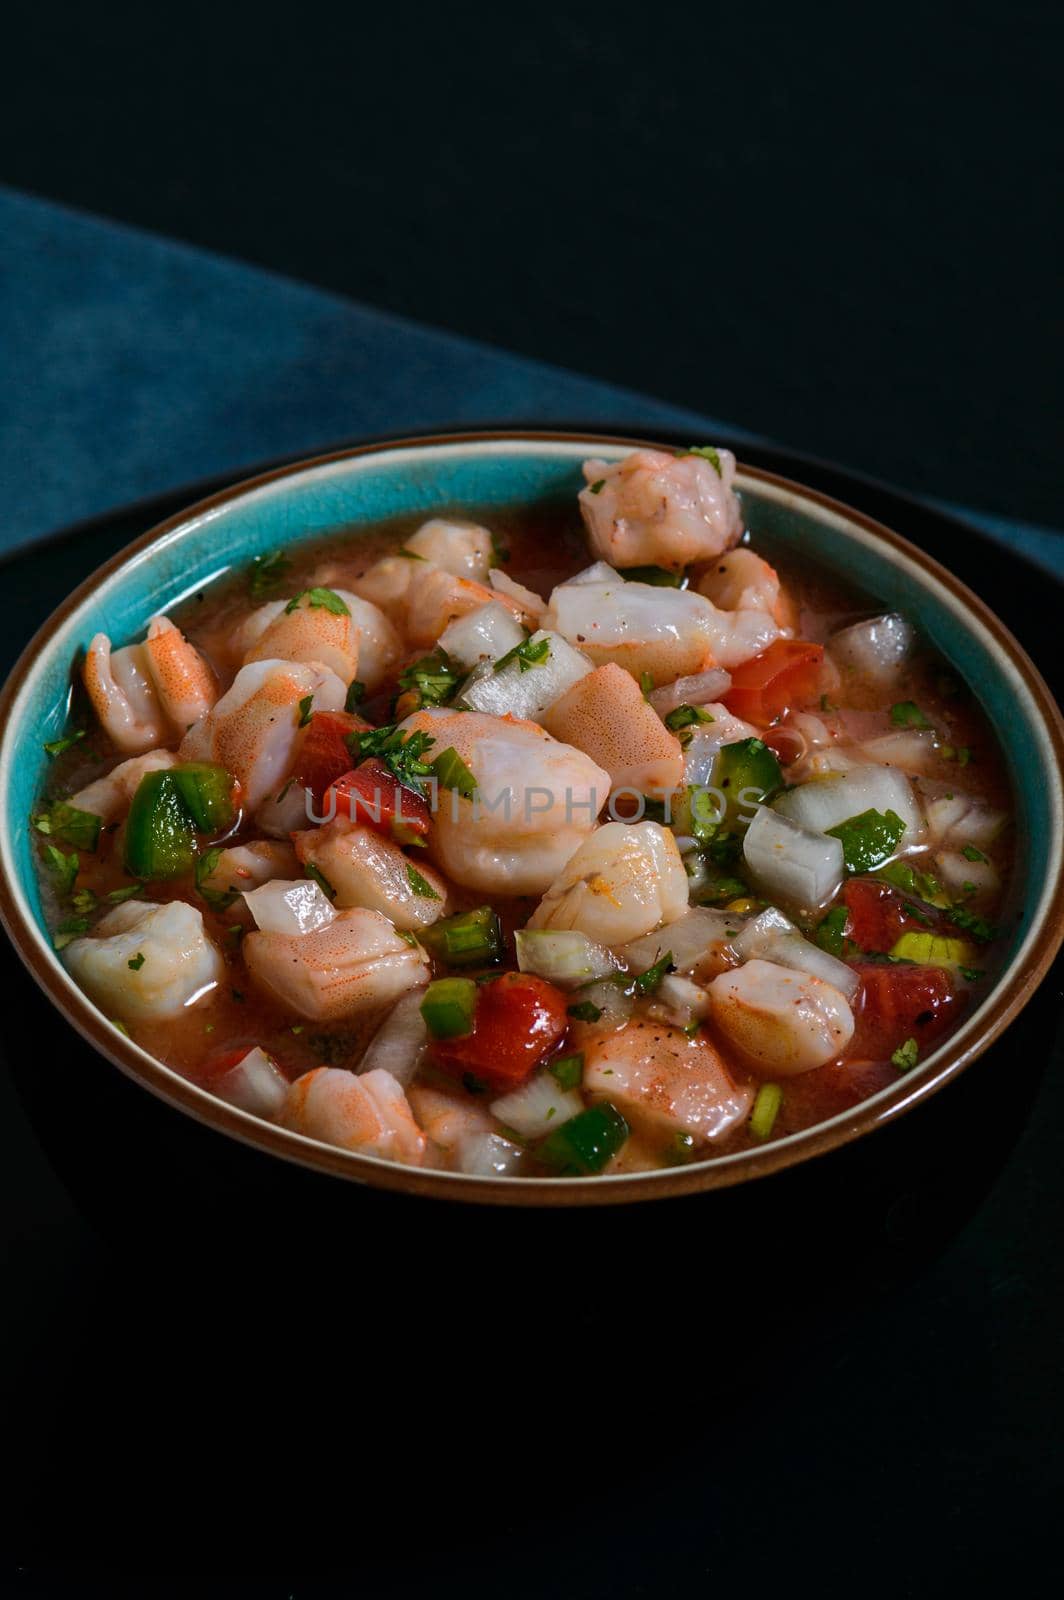 Red shrimp ceviche. Mexican food. Low key lighting on black and blue background